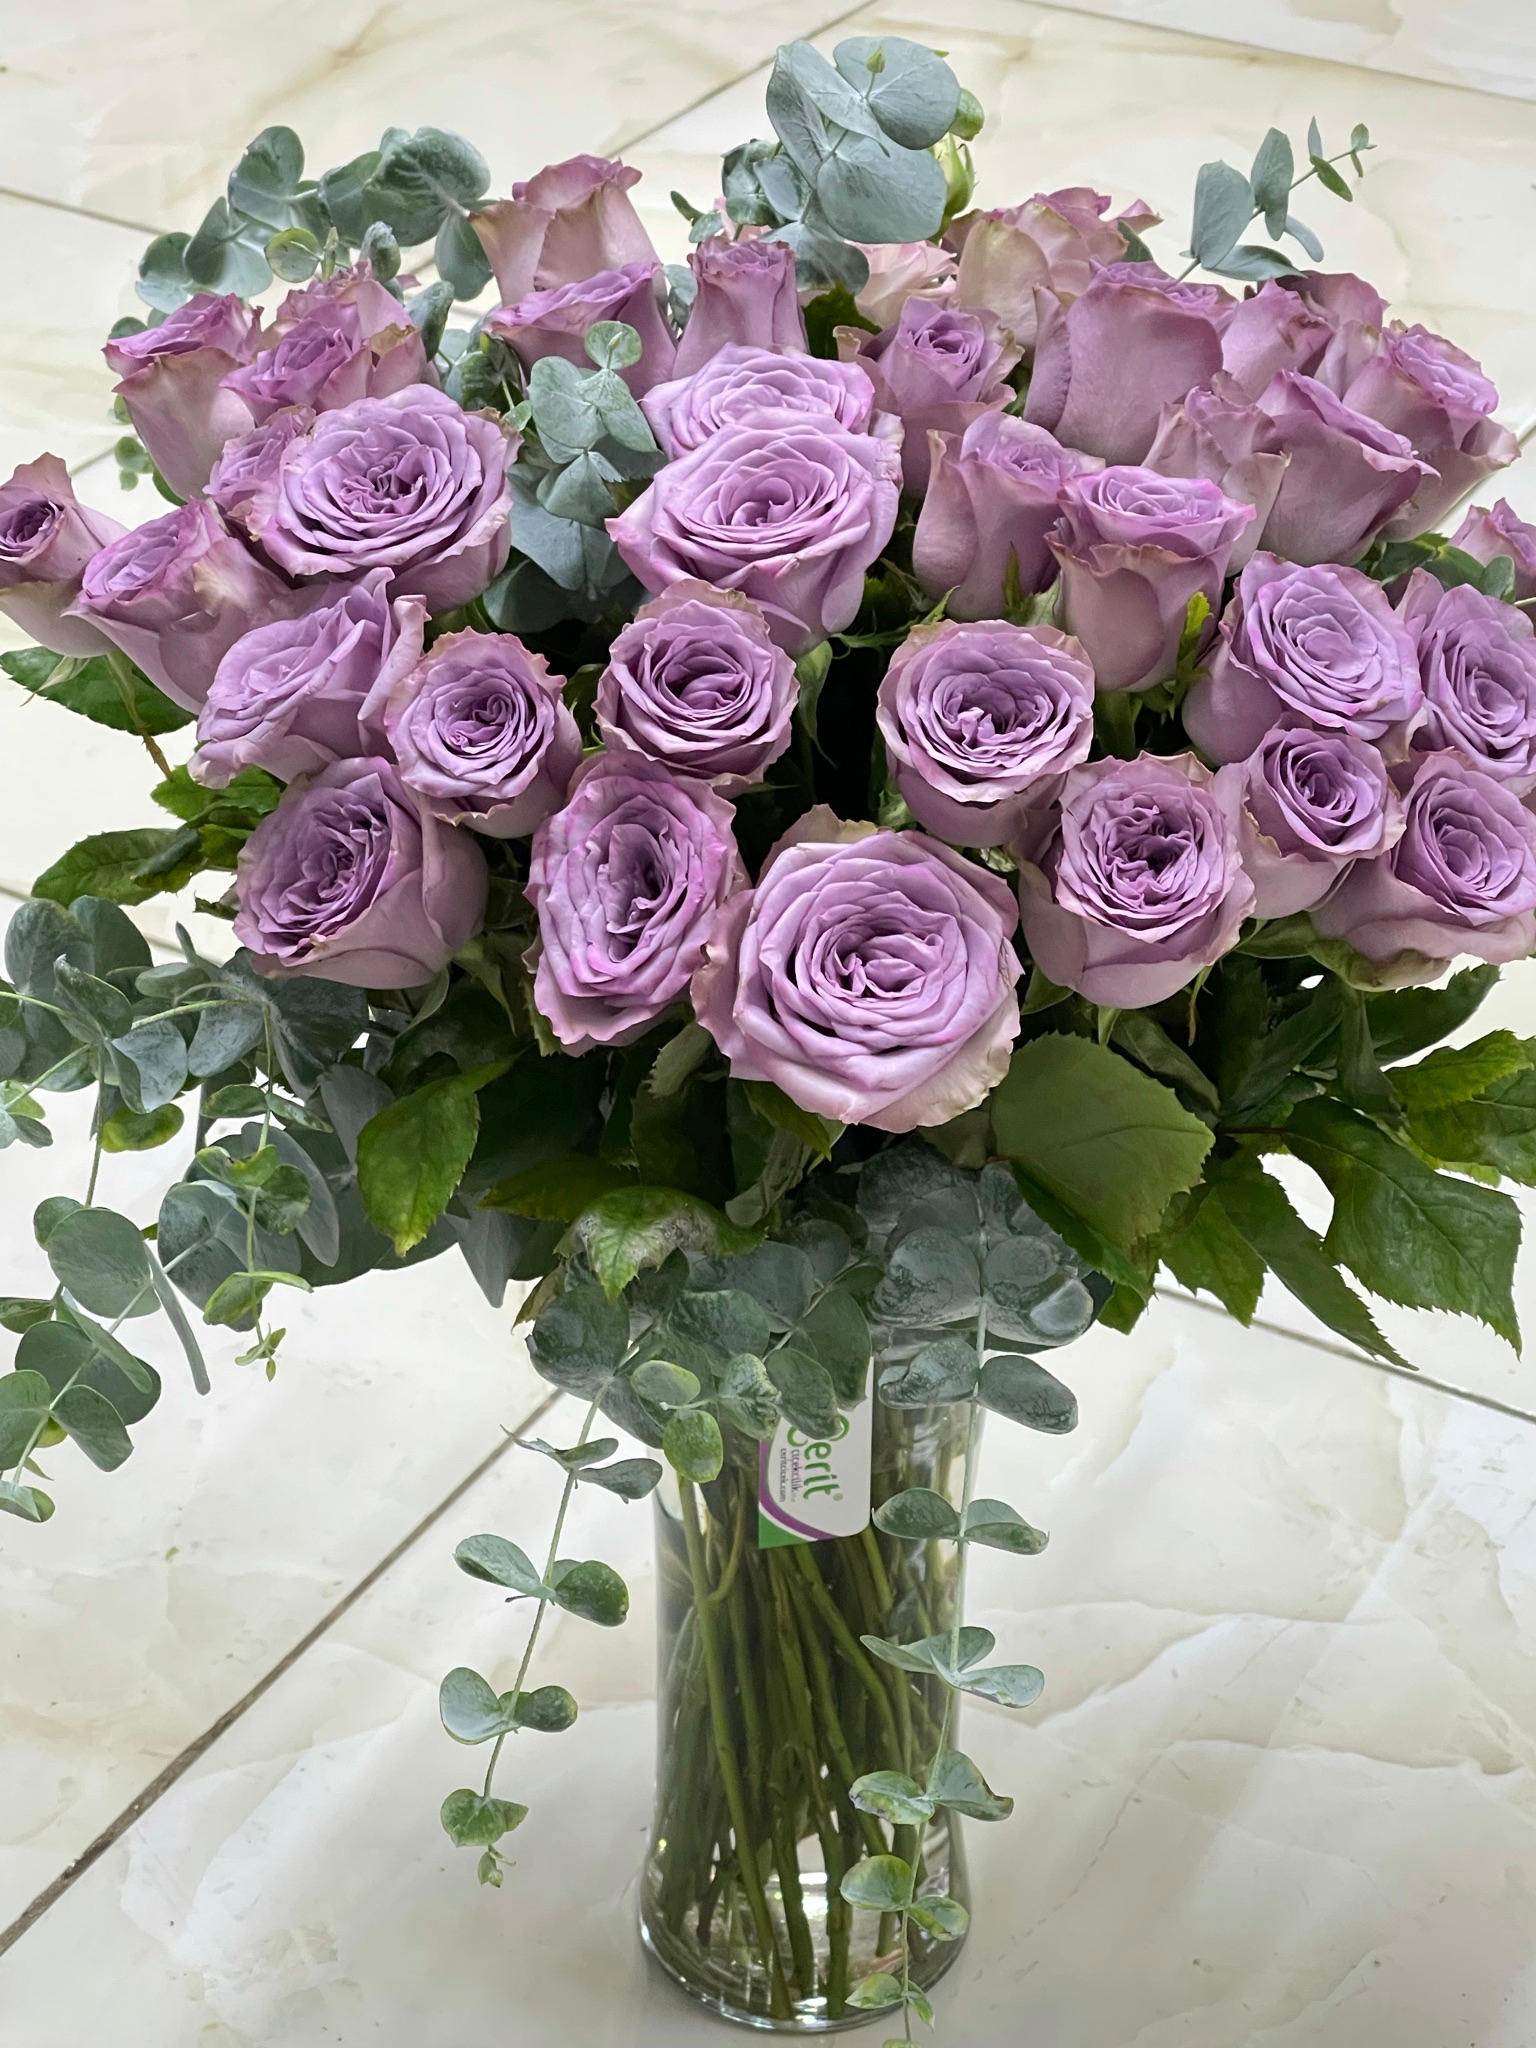  Kemer Florist 35 pieces of lilac roses in a vase